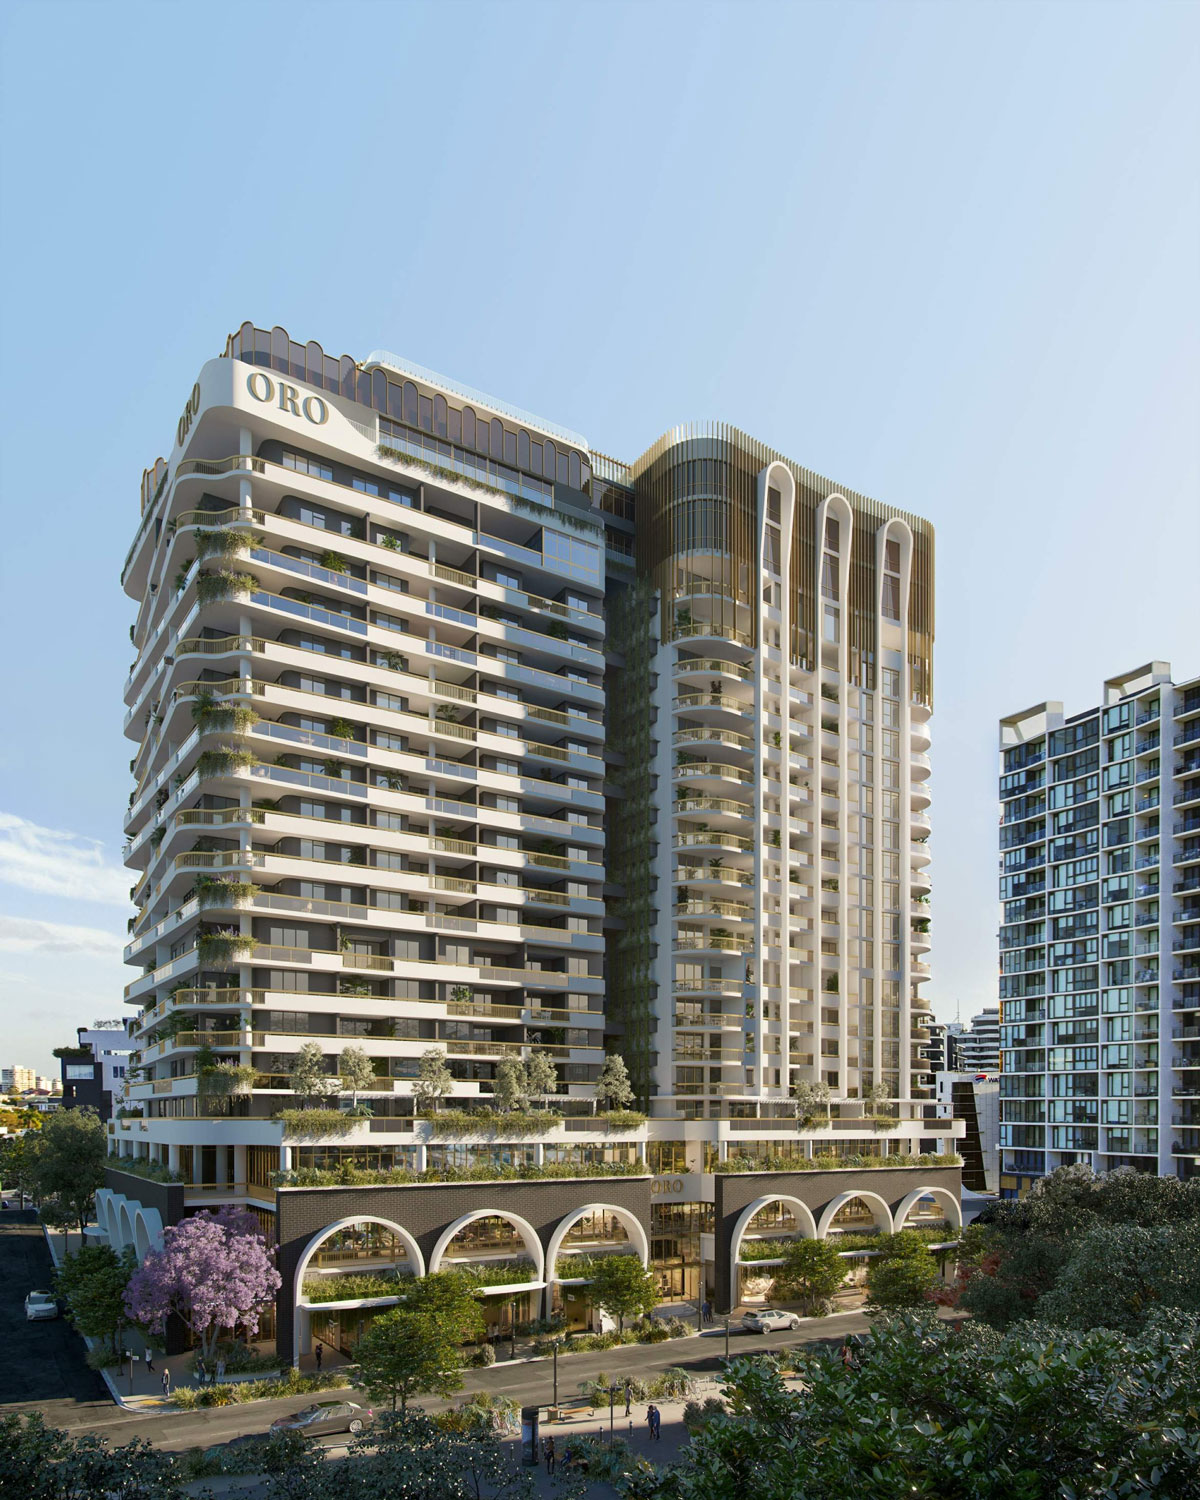 Architectual rendering of proposed 'Oro' mixed-use development at 75 Longland Street, Newstead